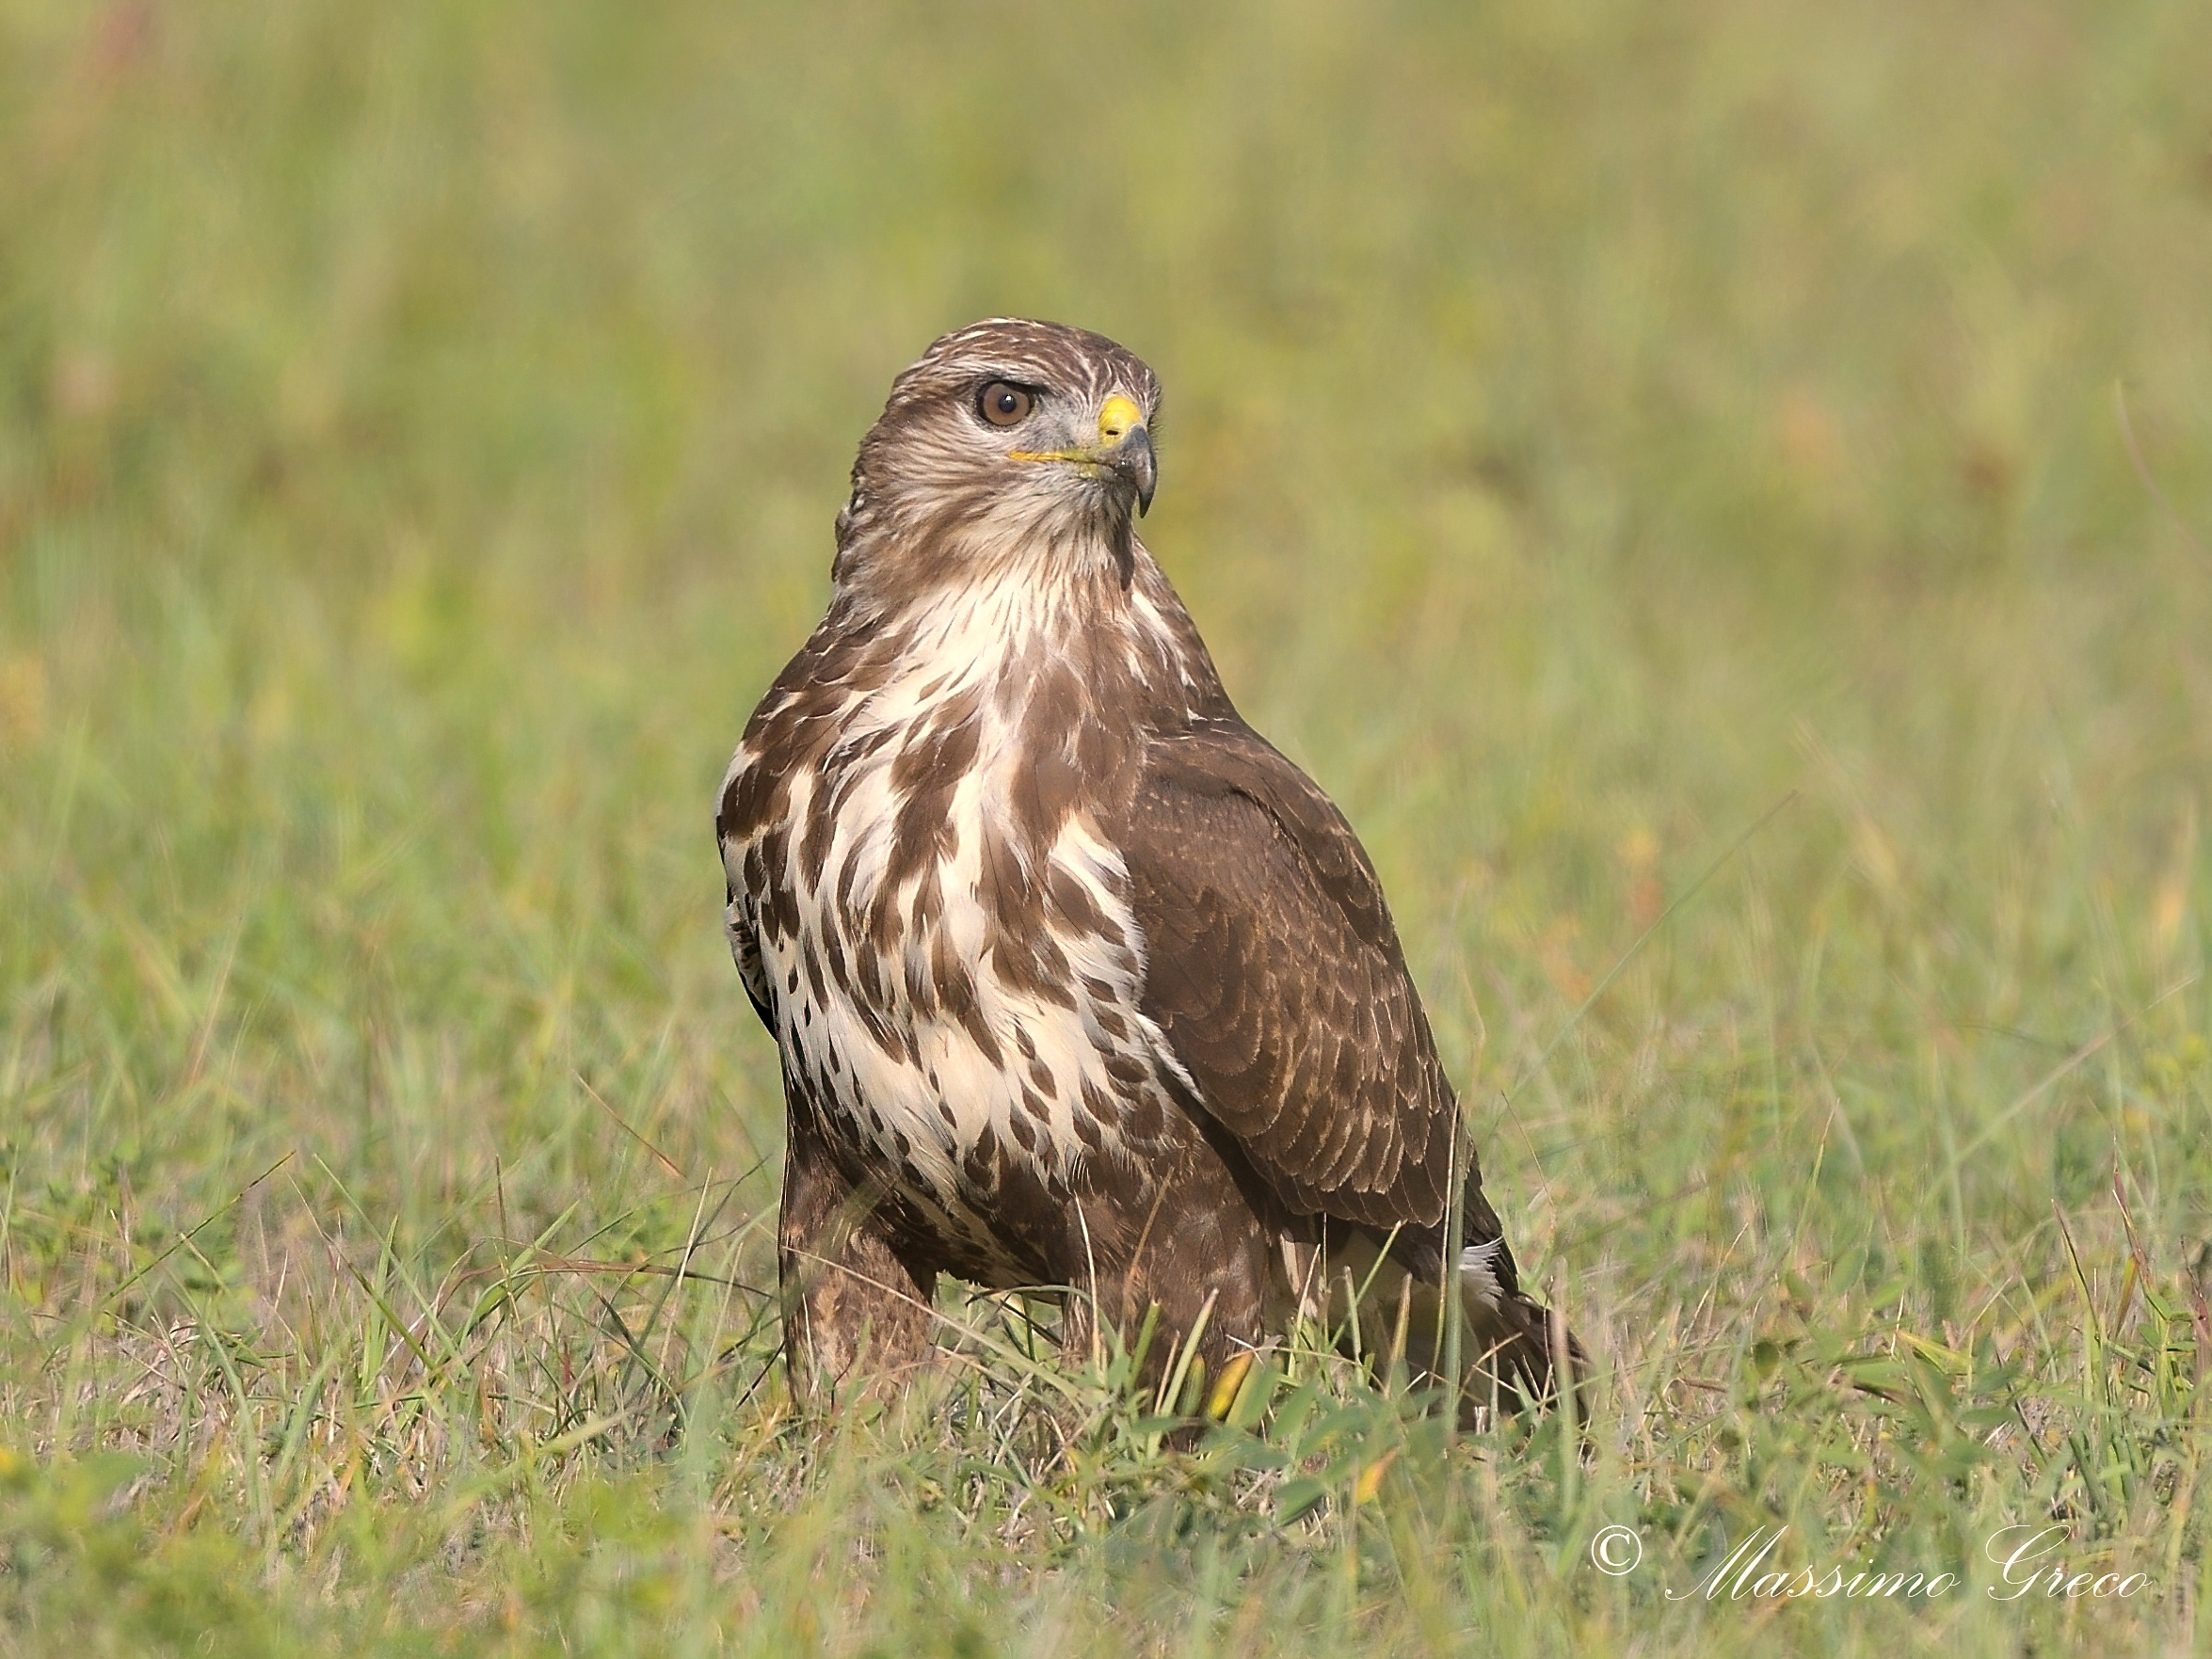 The proud look of the Buzzard...